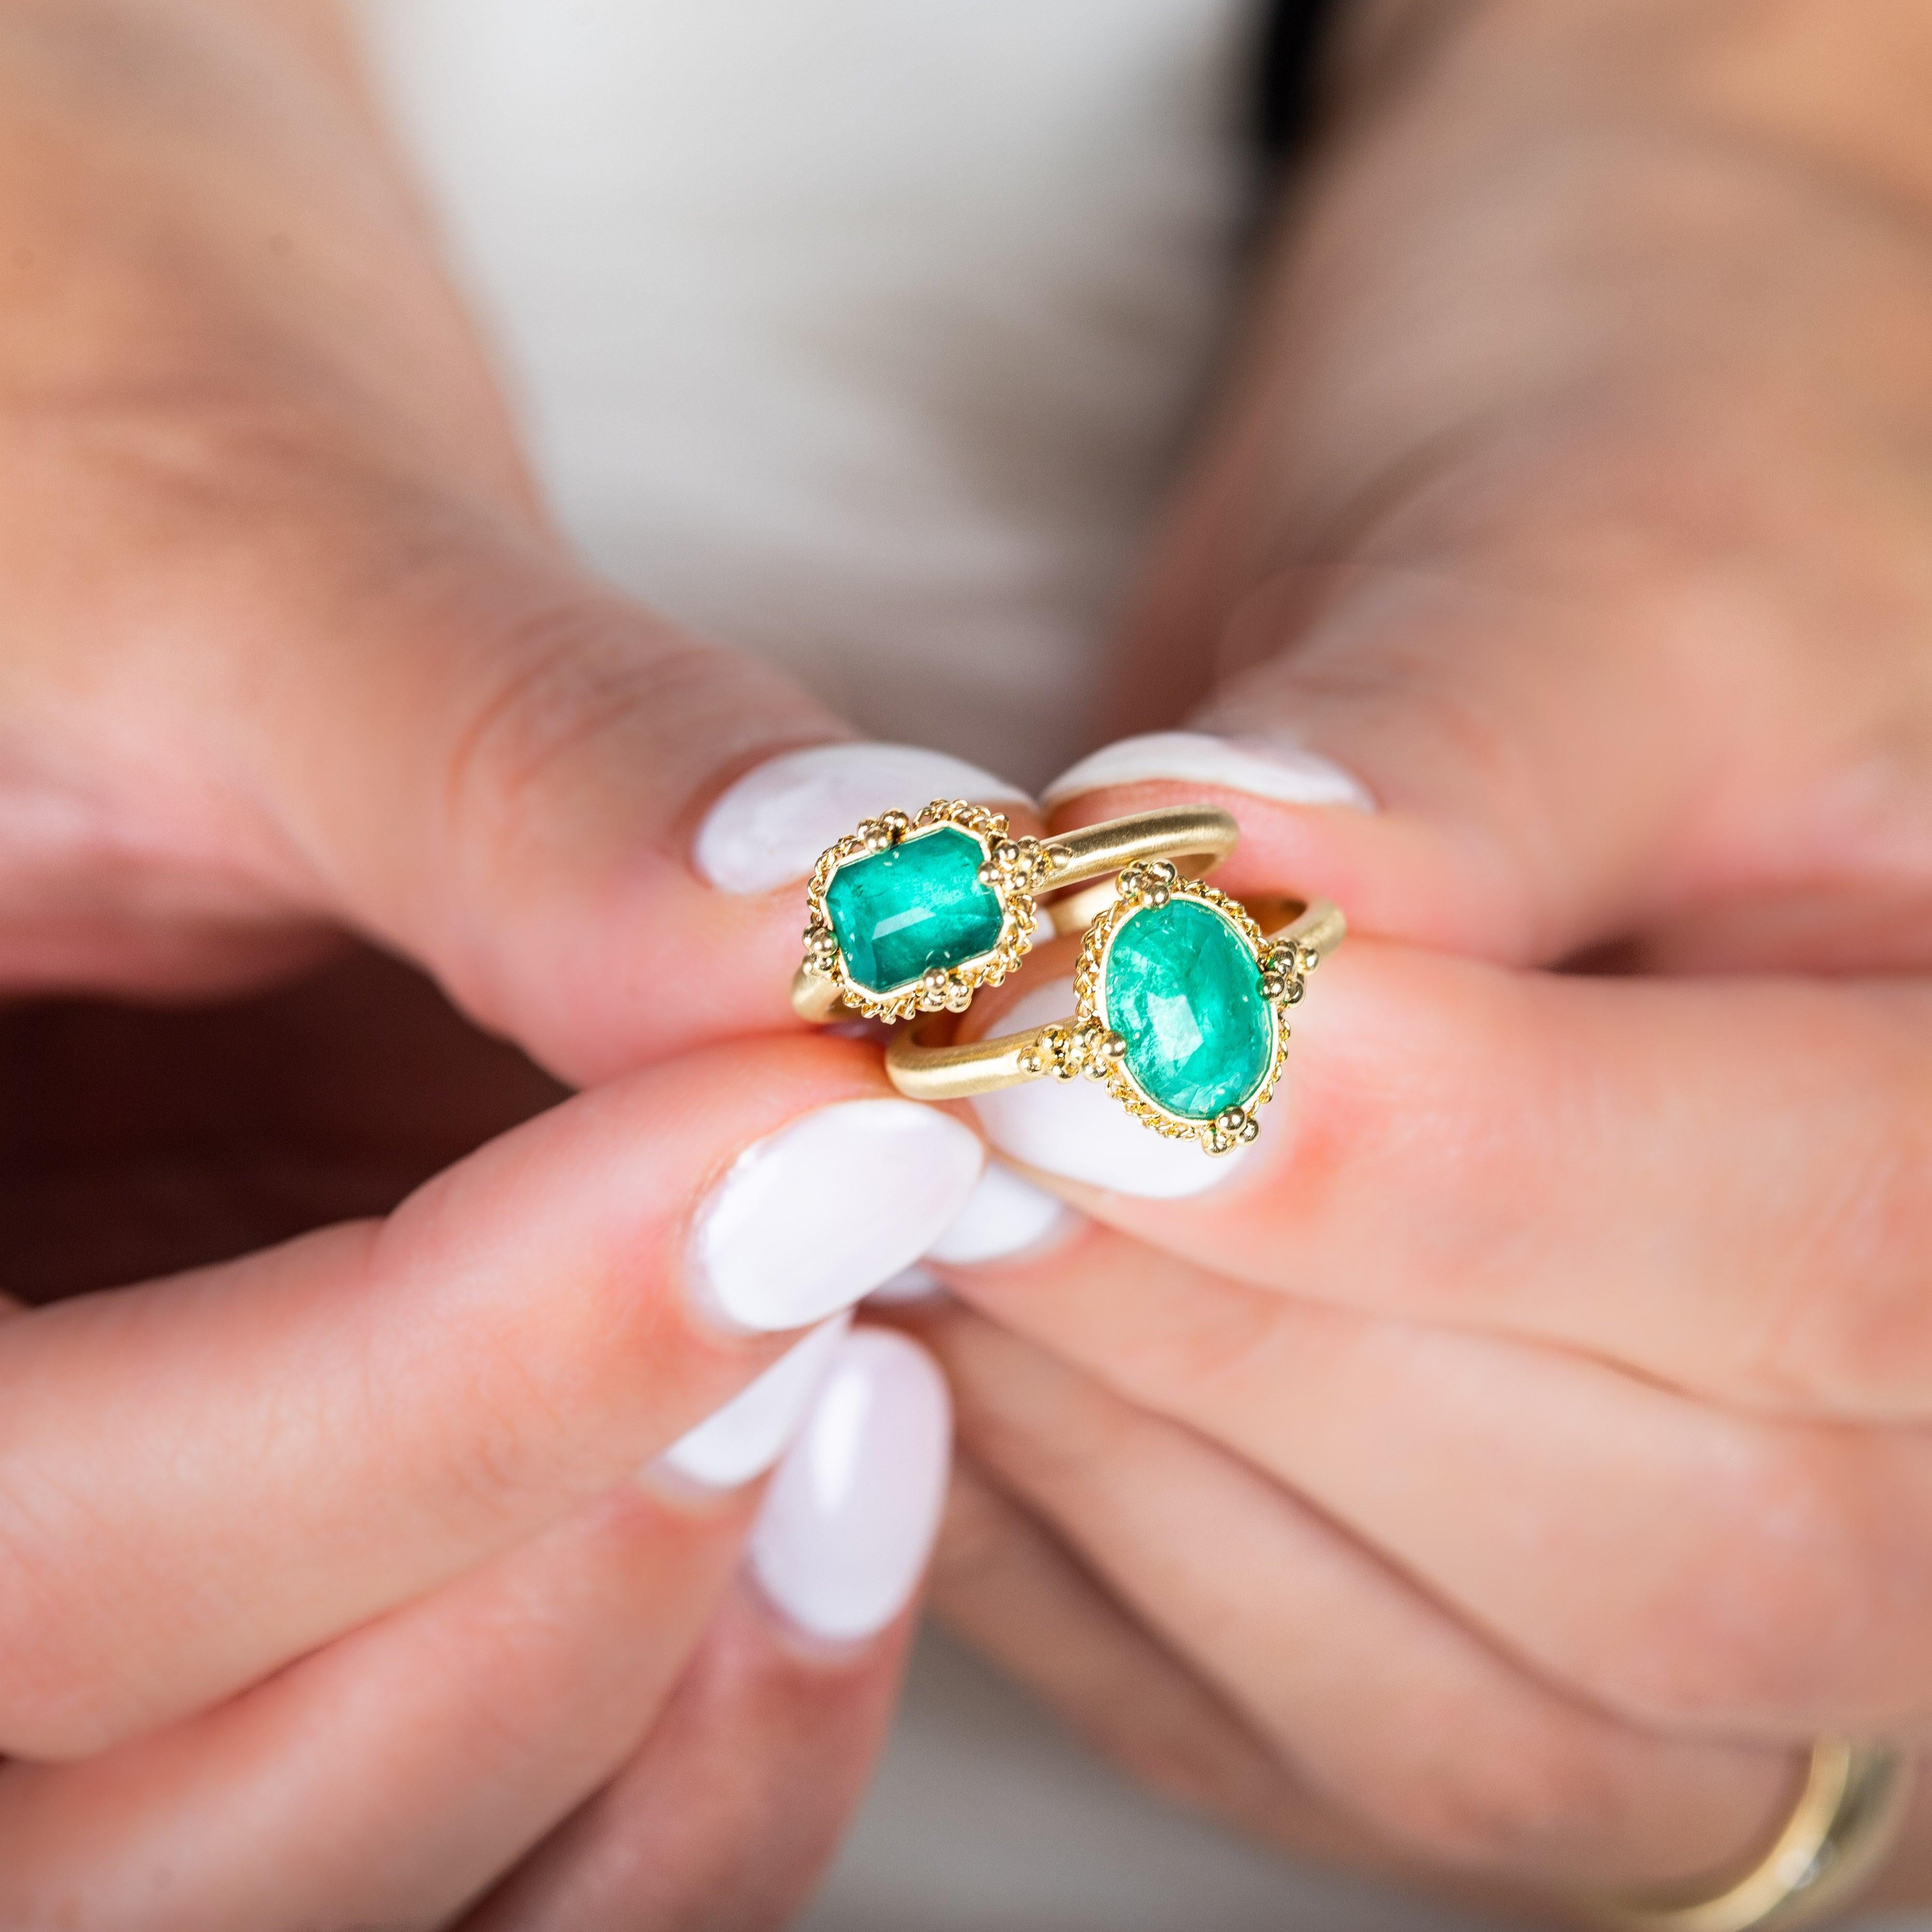 With its combination of lush, deep green and velvety gold, this ring embodies restrained luxury. We honored the natural beauty of this gemstones by encasing it in an intricate frame of shimmering golden chain and delicate beaded prongs. One of a